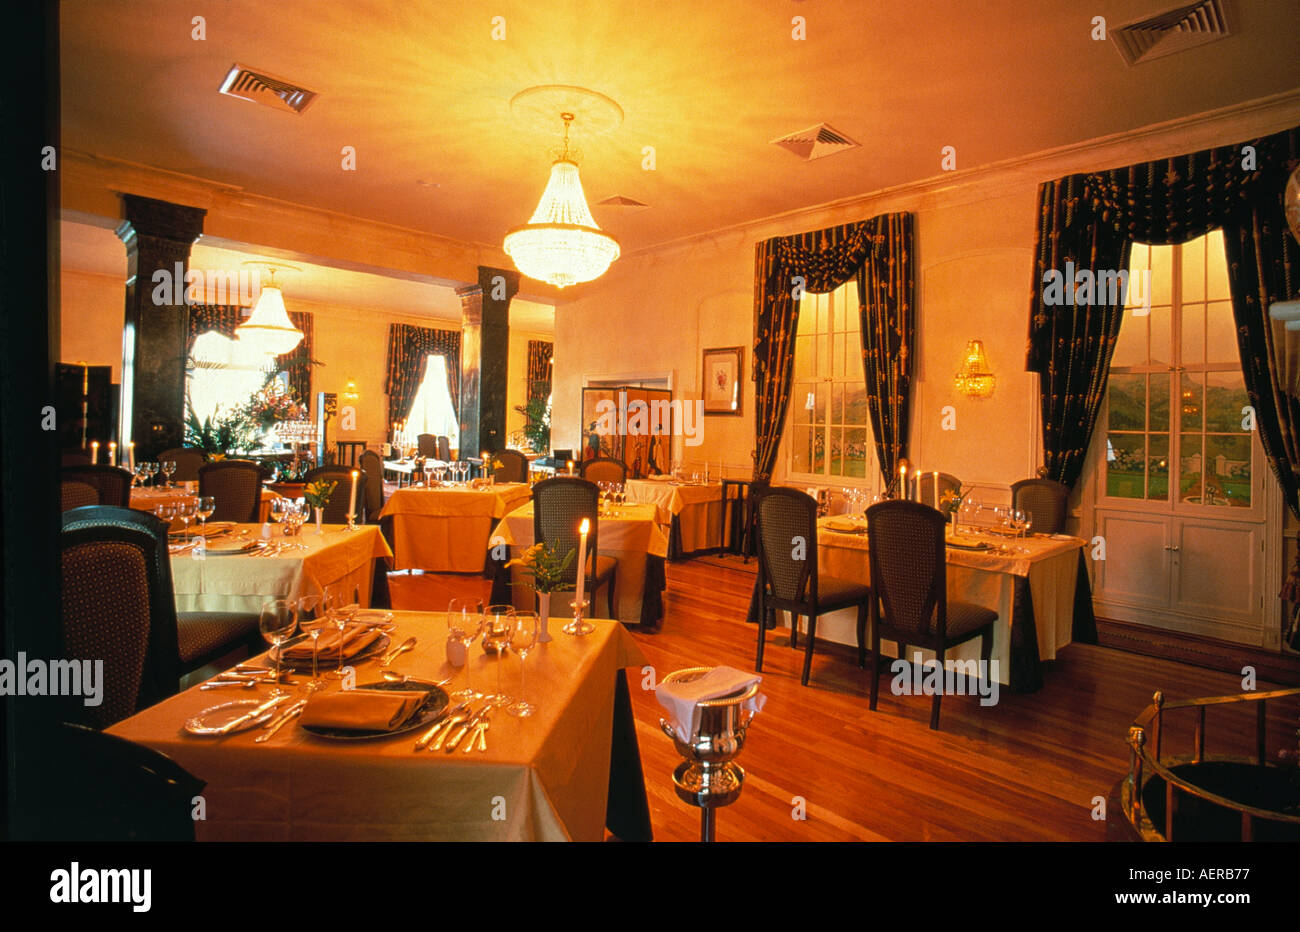 bosmans restaurant city of cape town south africa Stock Photo